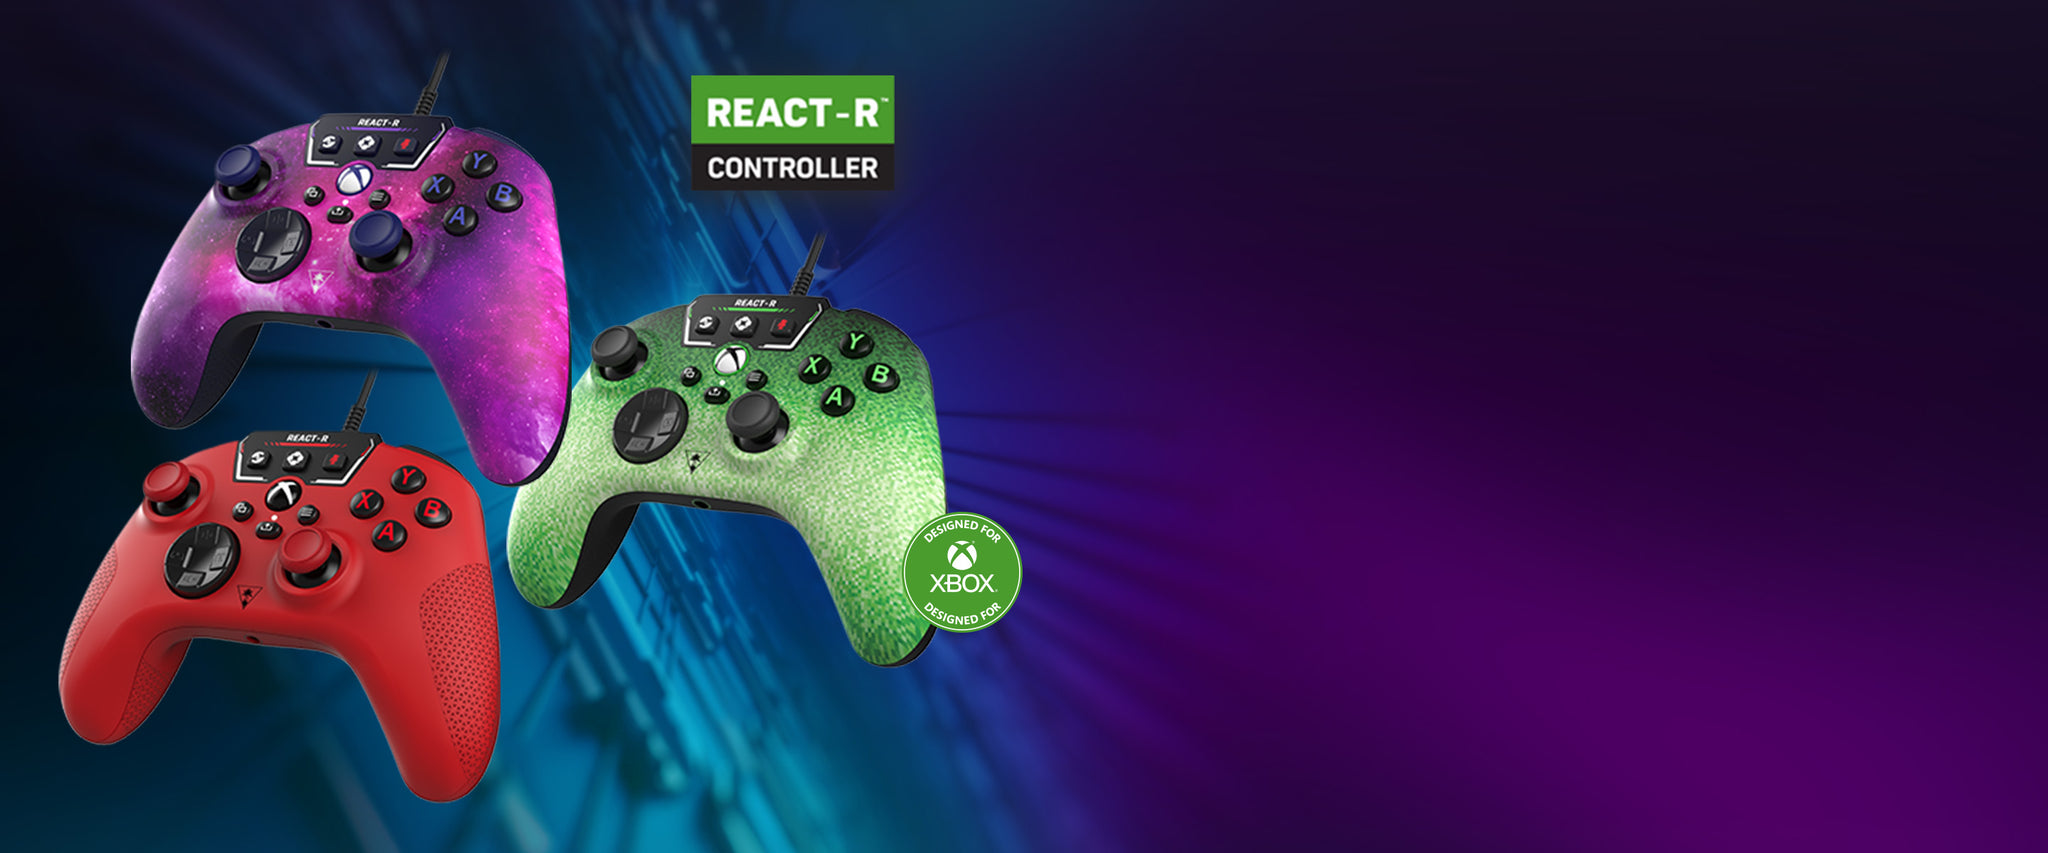 Three New Colors of the REACT-R Controllers are Available NOW!